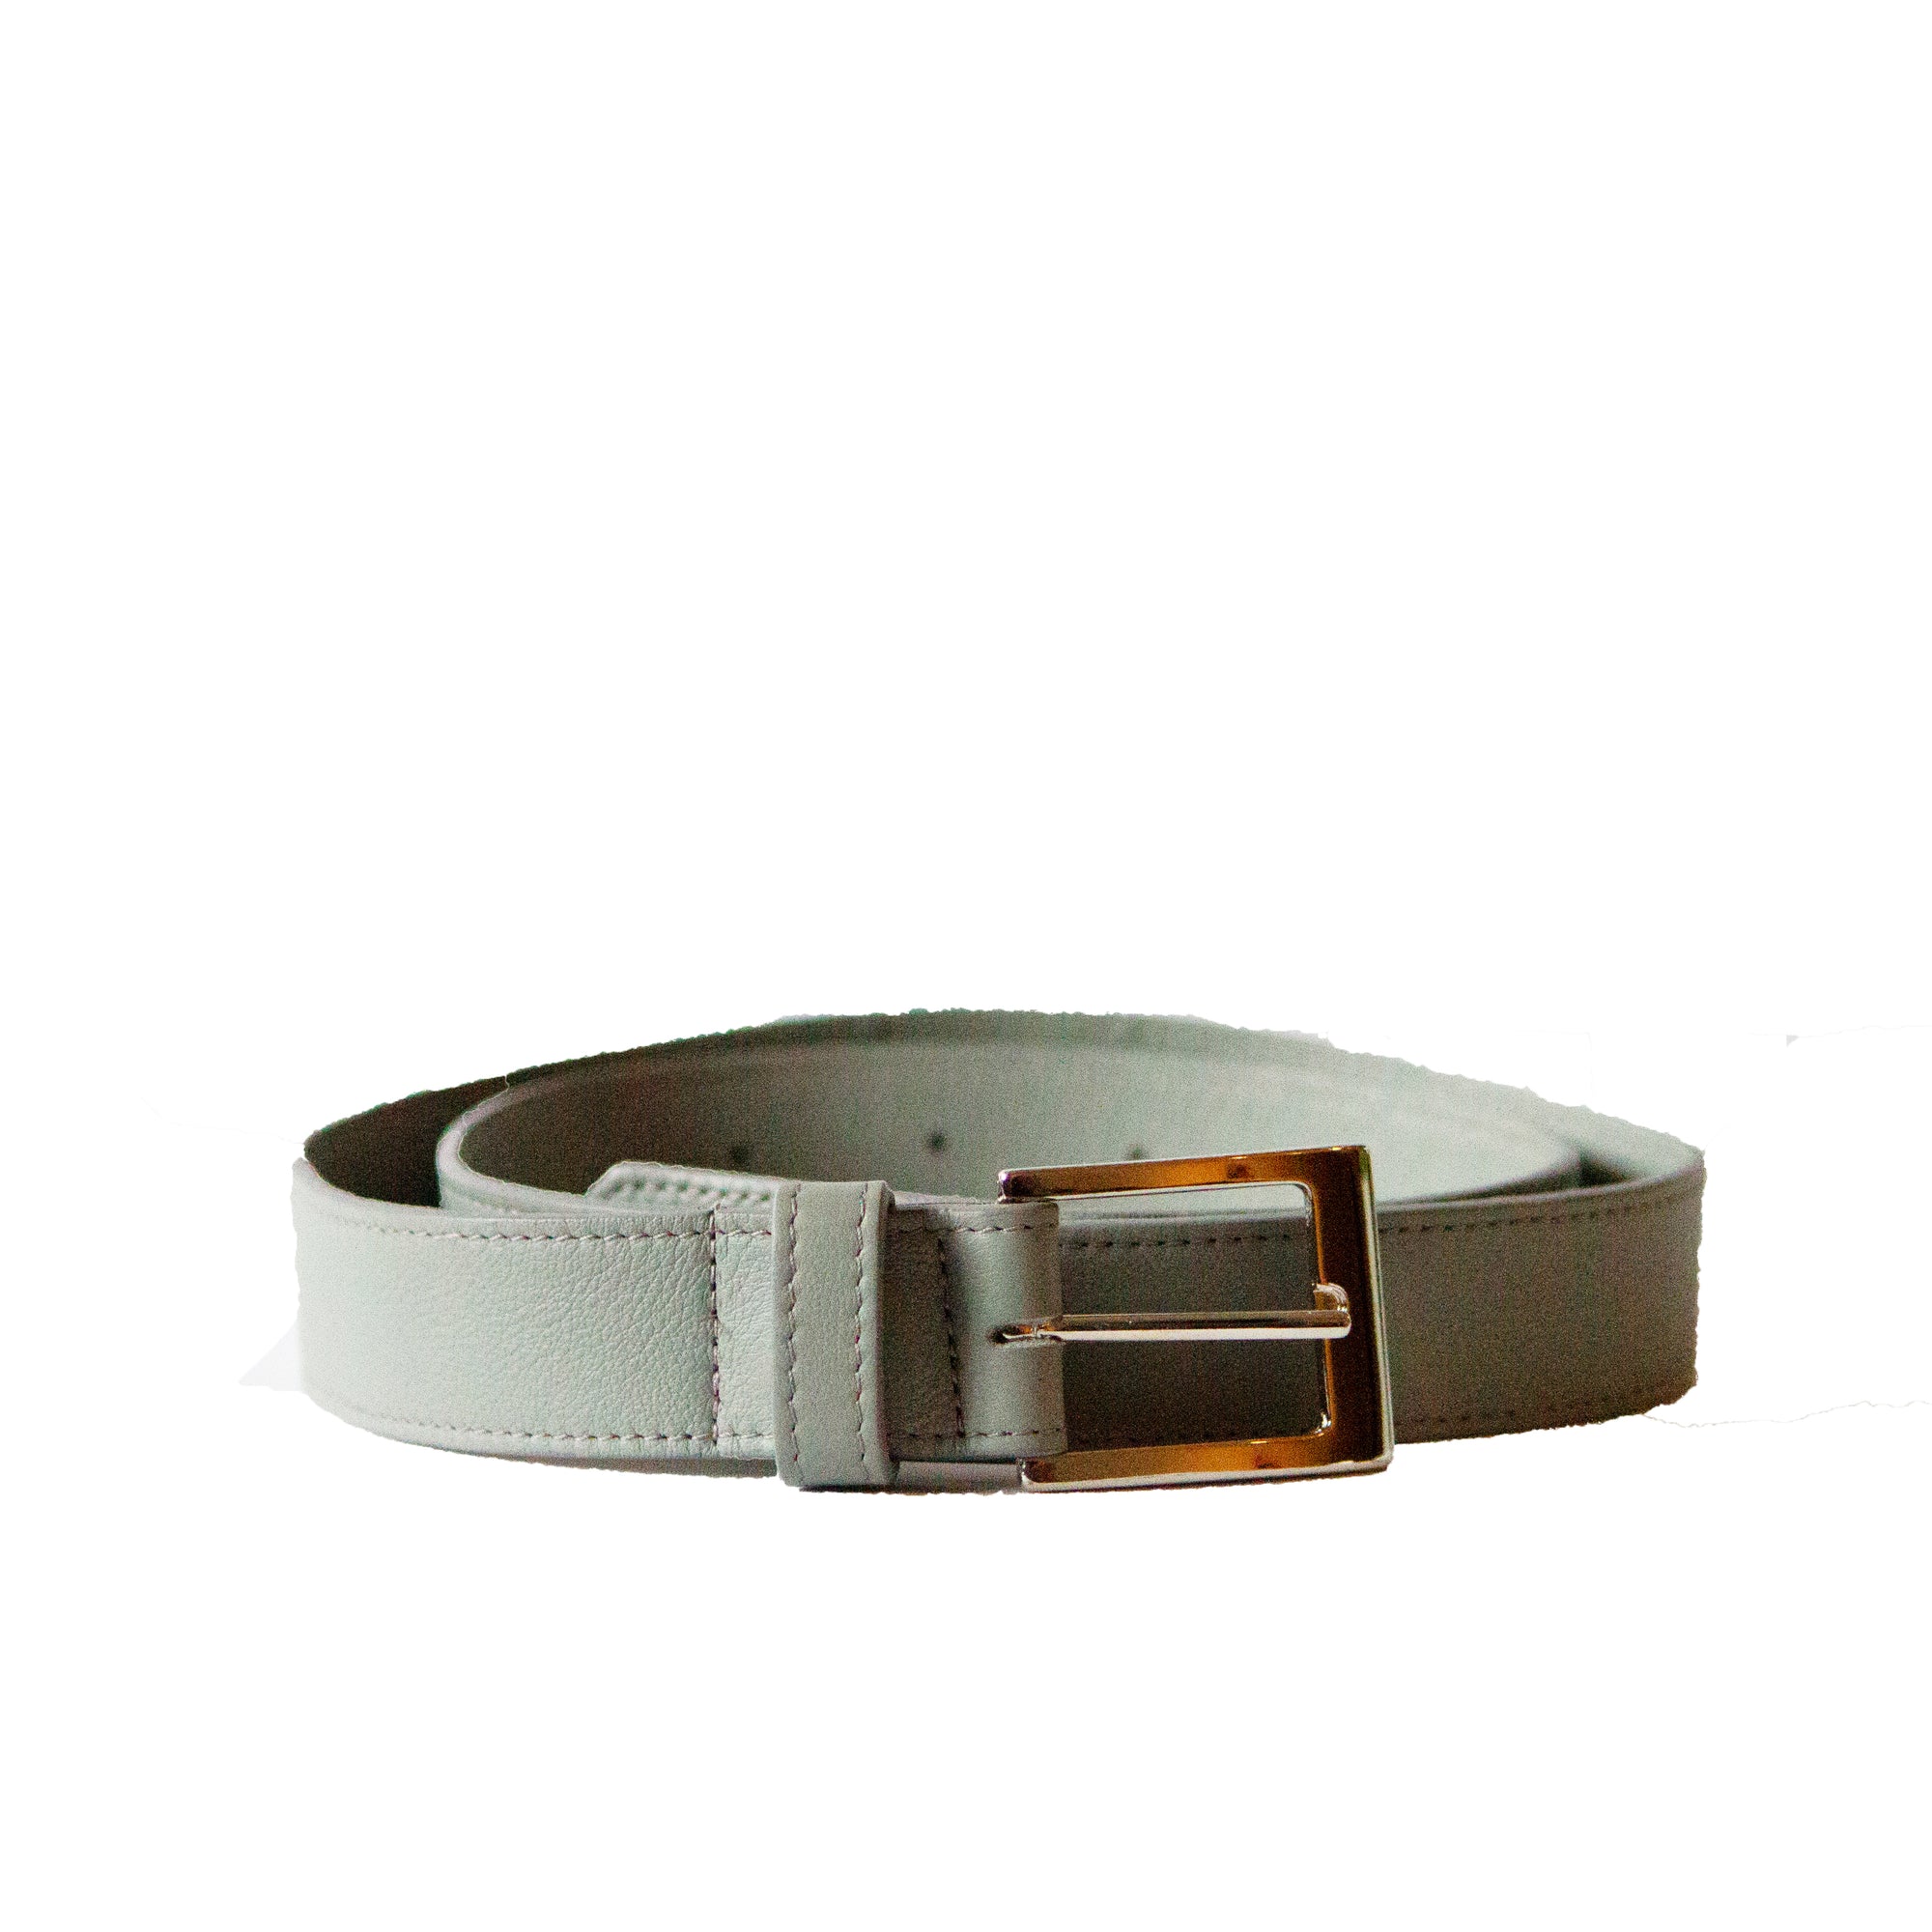 LIN8 unisex taurillon, togo leather belt with buckle made in Italy. Customise, create, design, personalise your own today. Minimal belt strap for men and women.